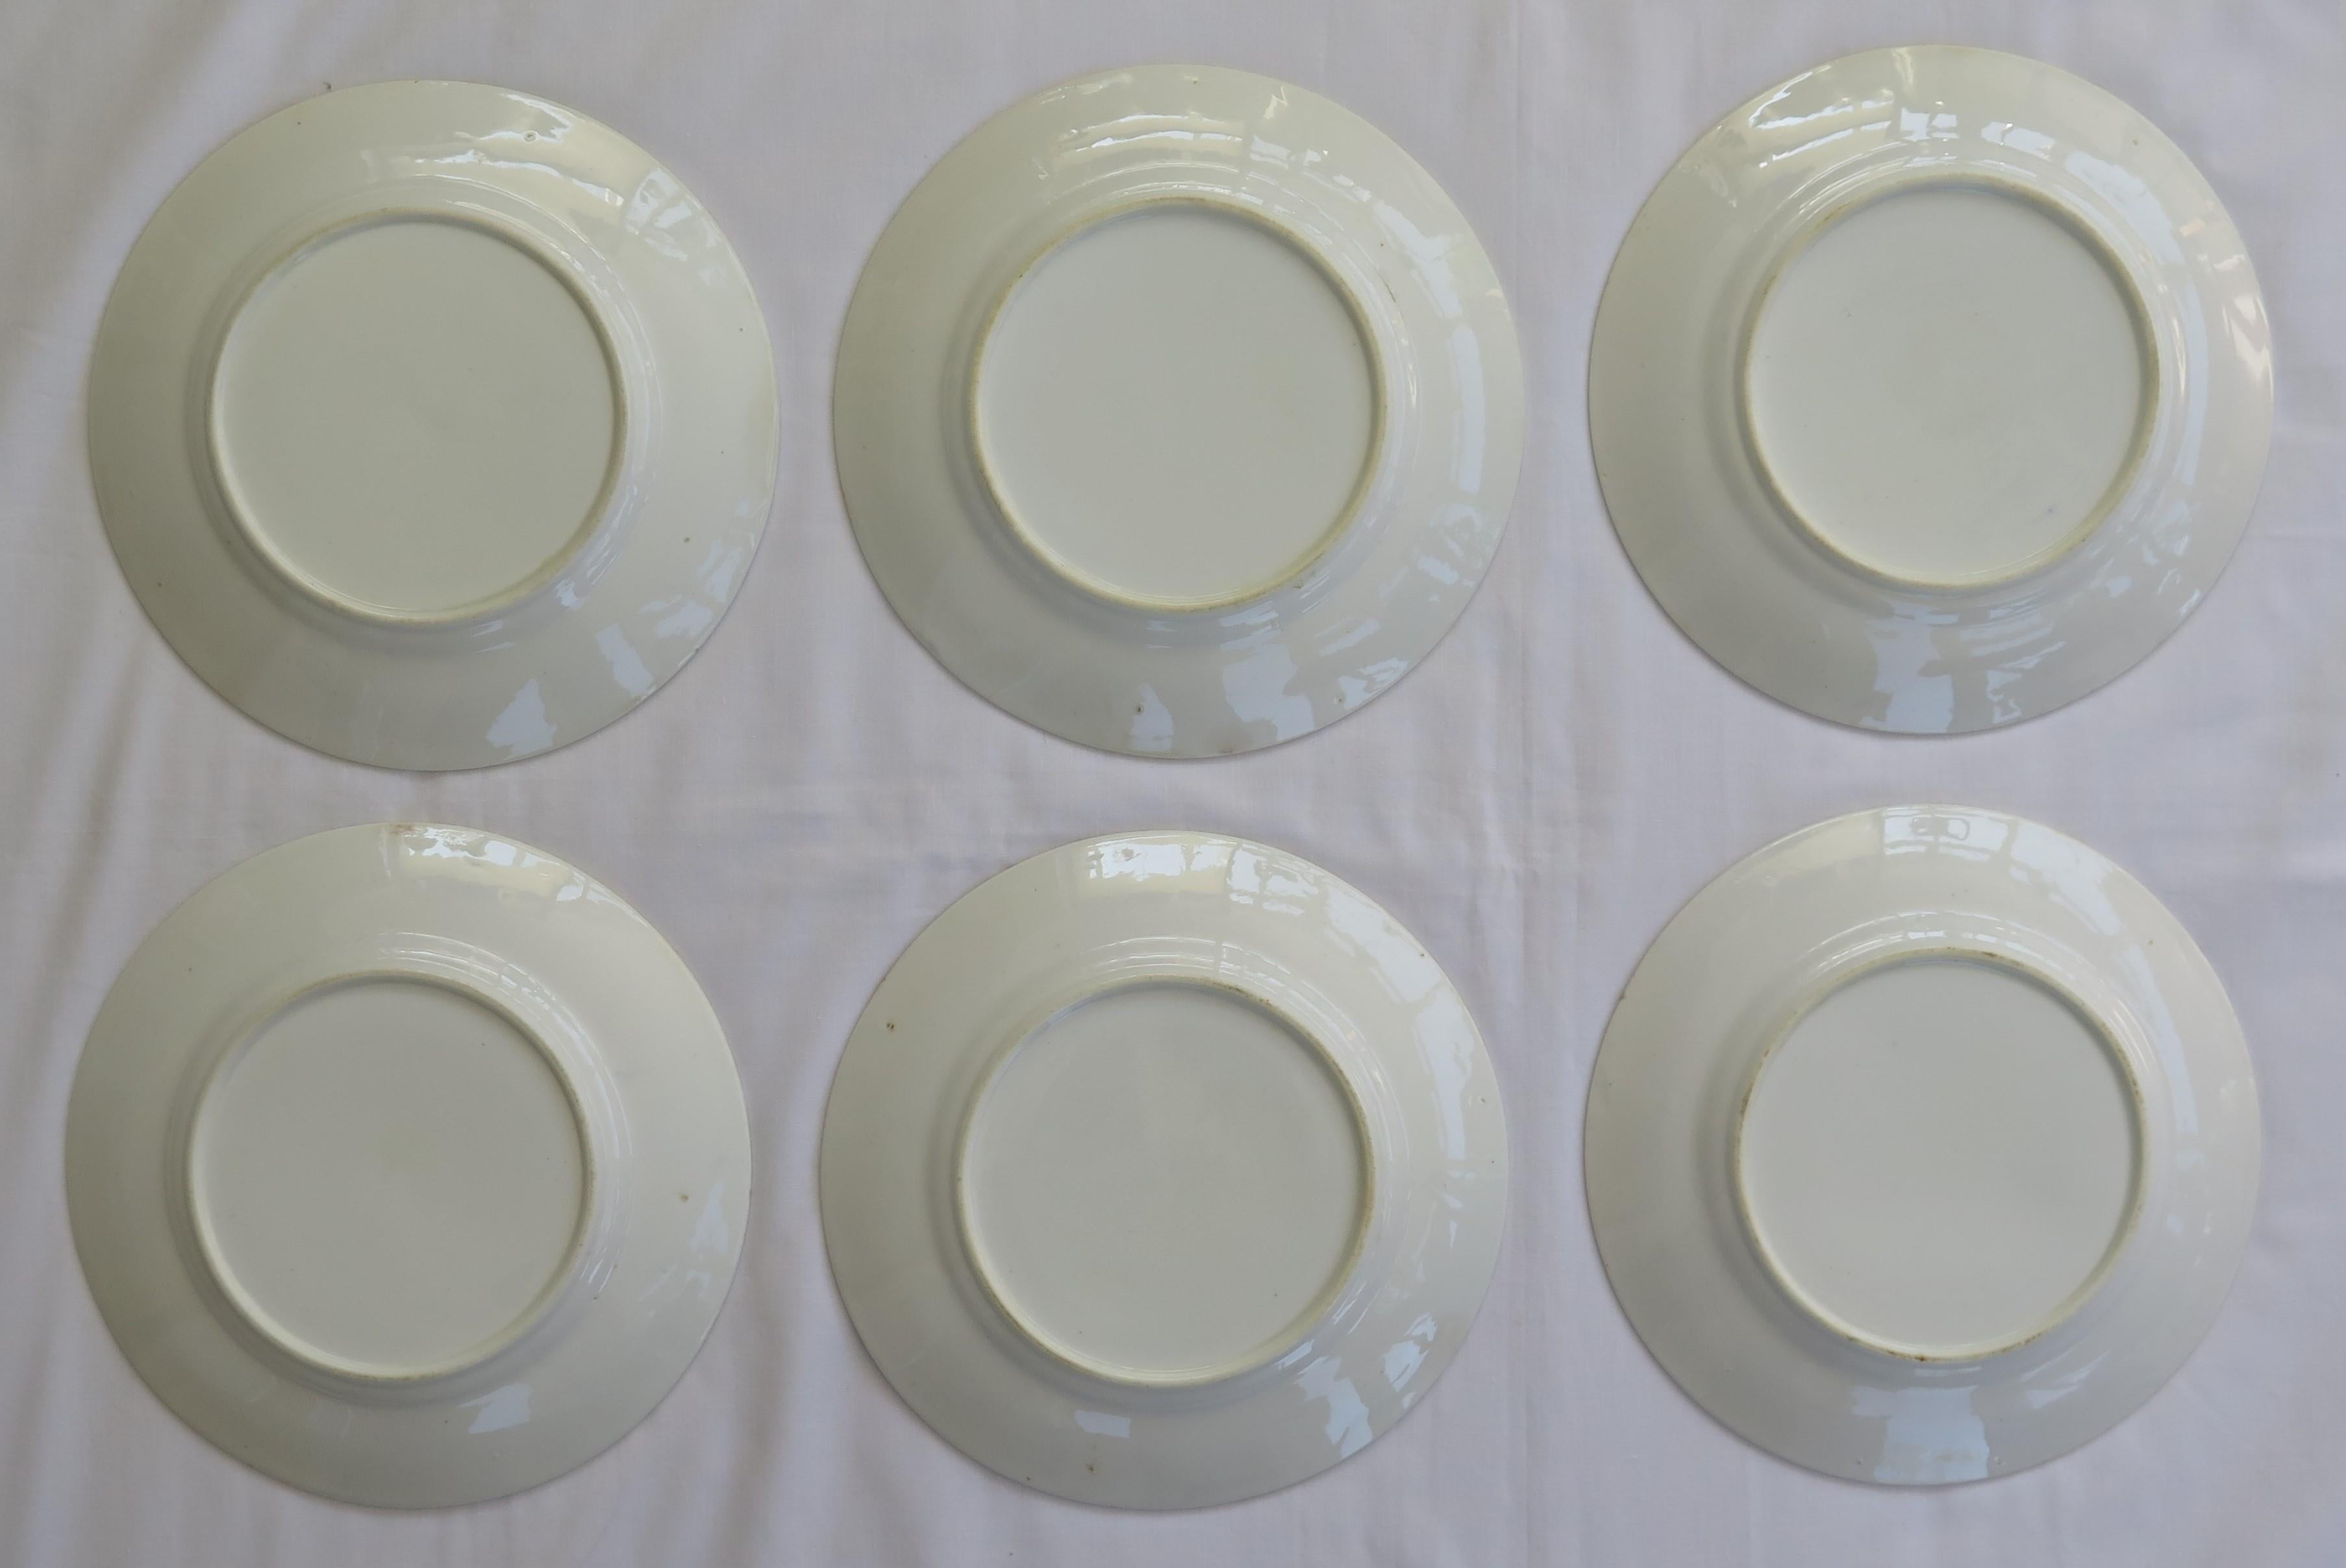 SIX Davenport Porcelain Plates Hand Painted and Gilded Pattern, Circa 1870 For Sale 13